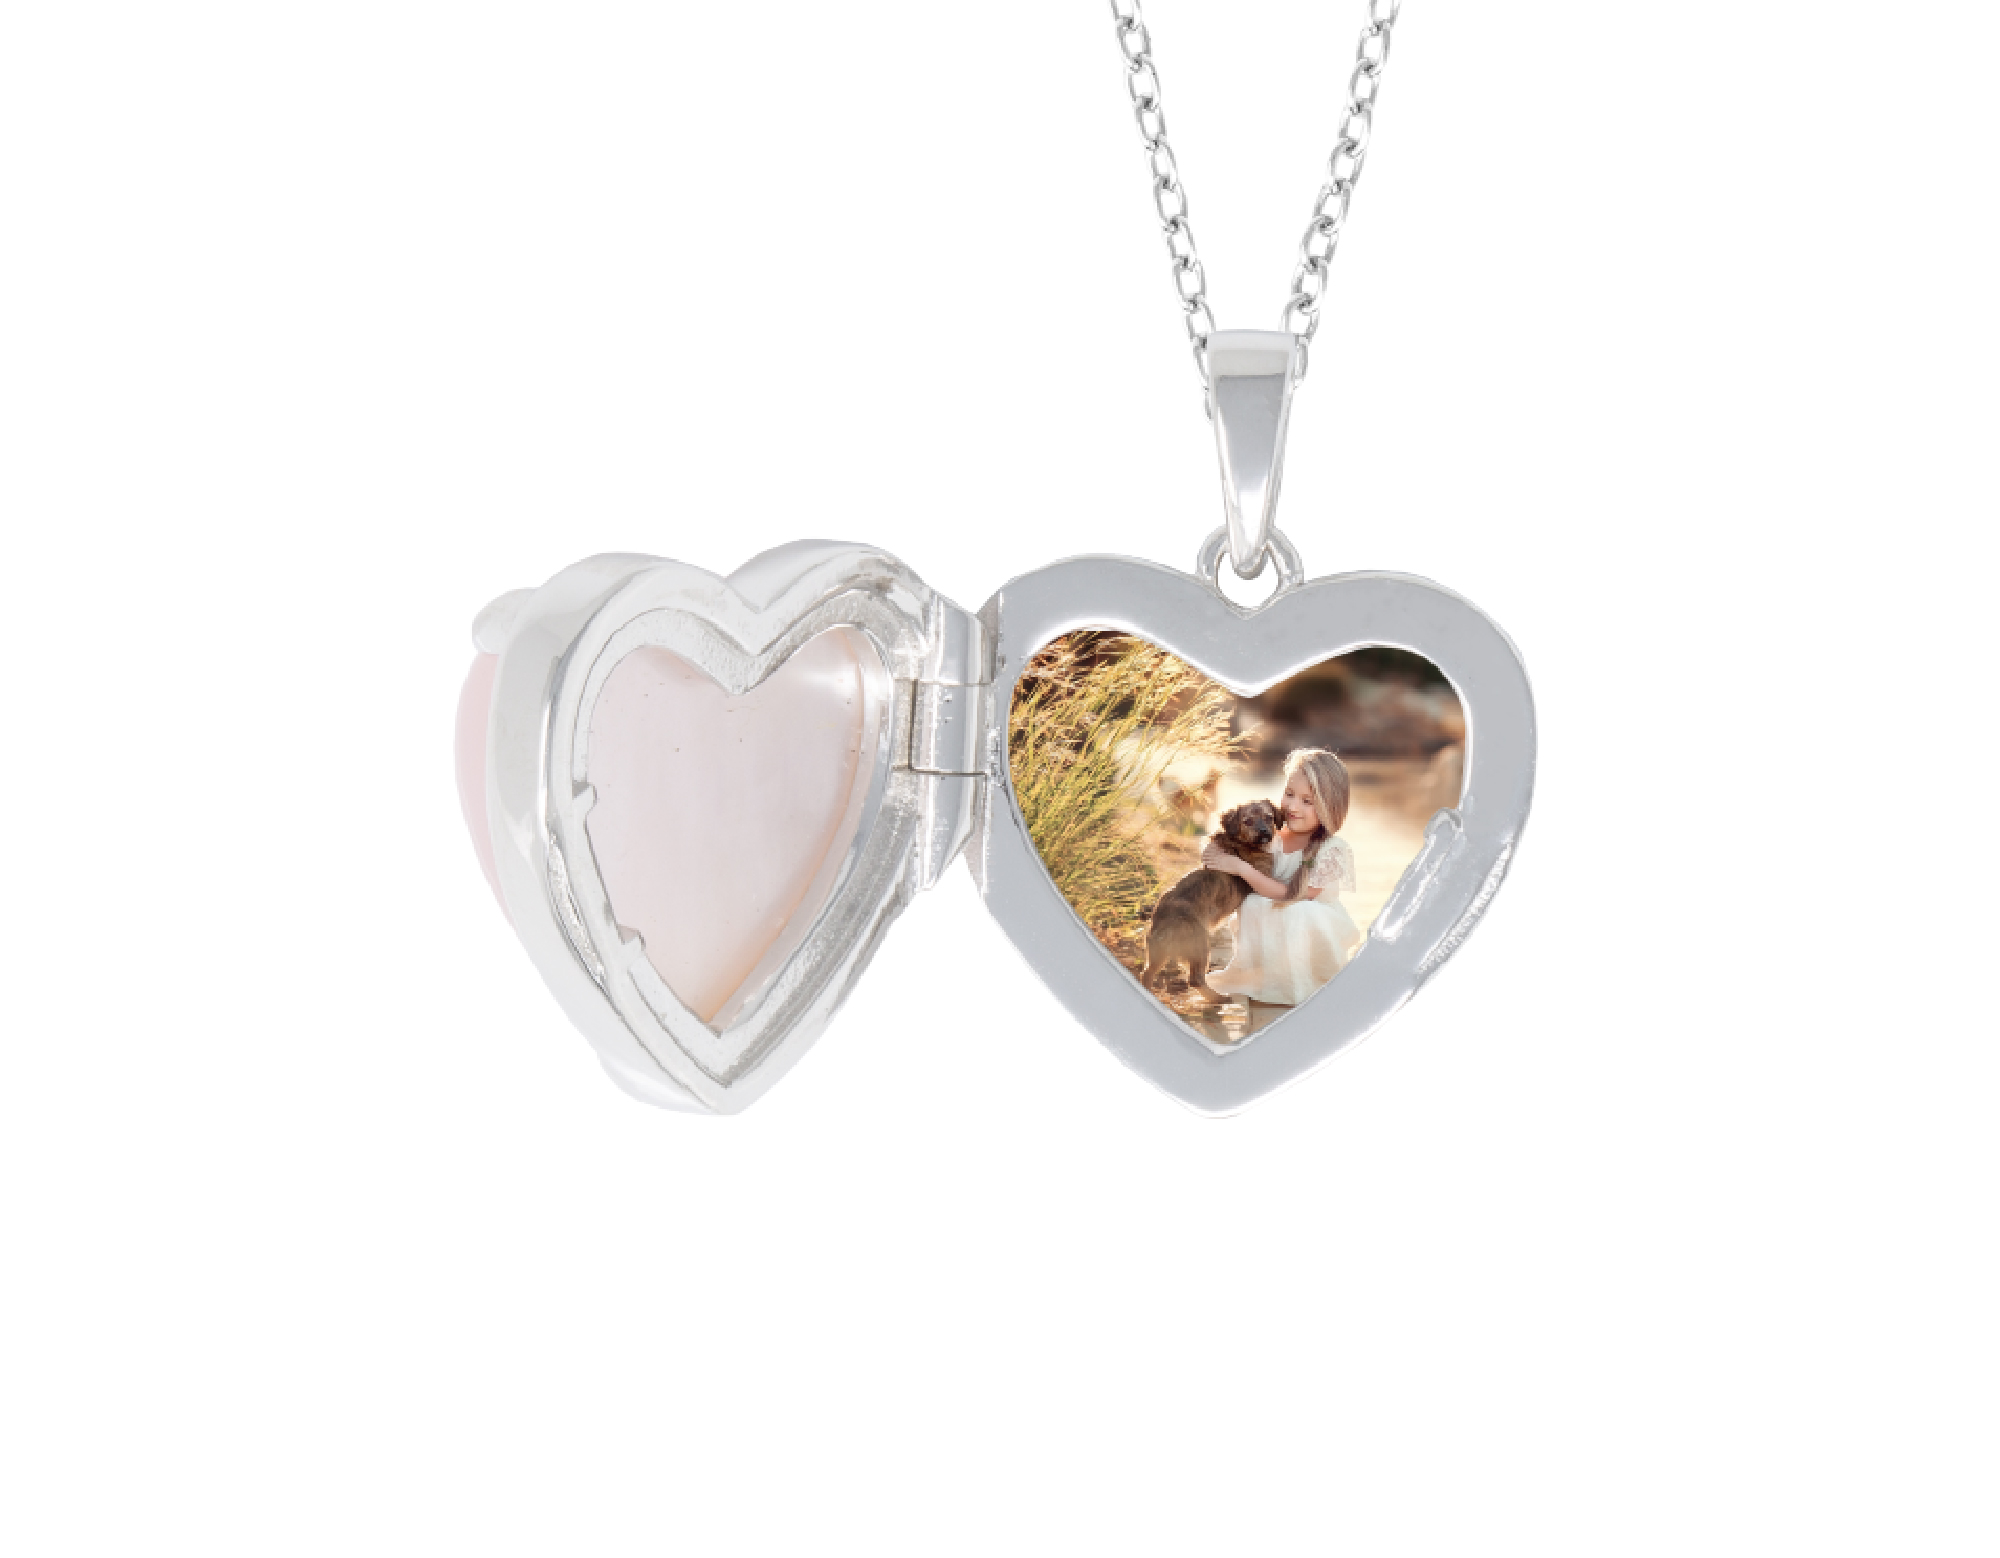 With You Lockets-Sterling Silver Heart Shaped Glass-Custom Photo Locket Necklace-That Holds Pictures-The Lana 